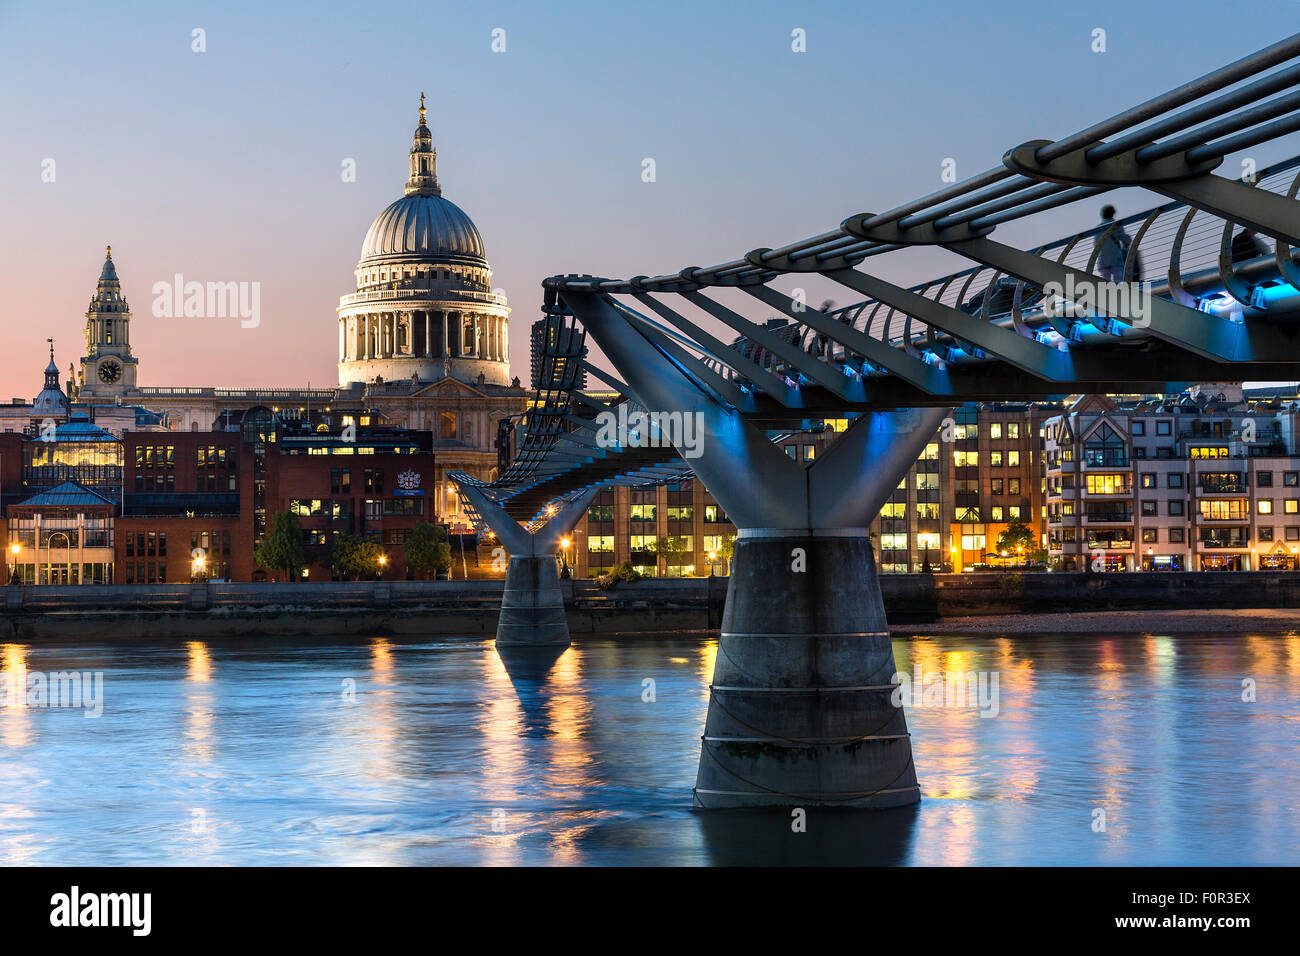 London, London Millennium Footbridge  and St. Paul's Cathedral at night Stock Photo